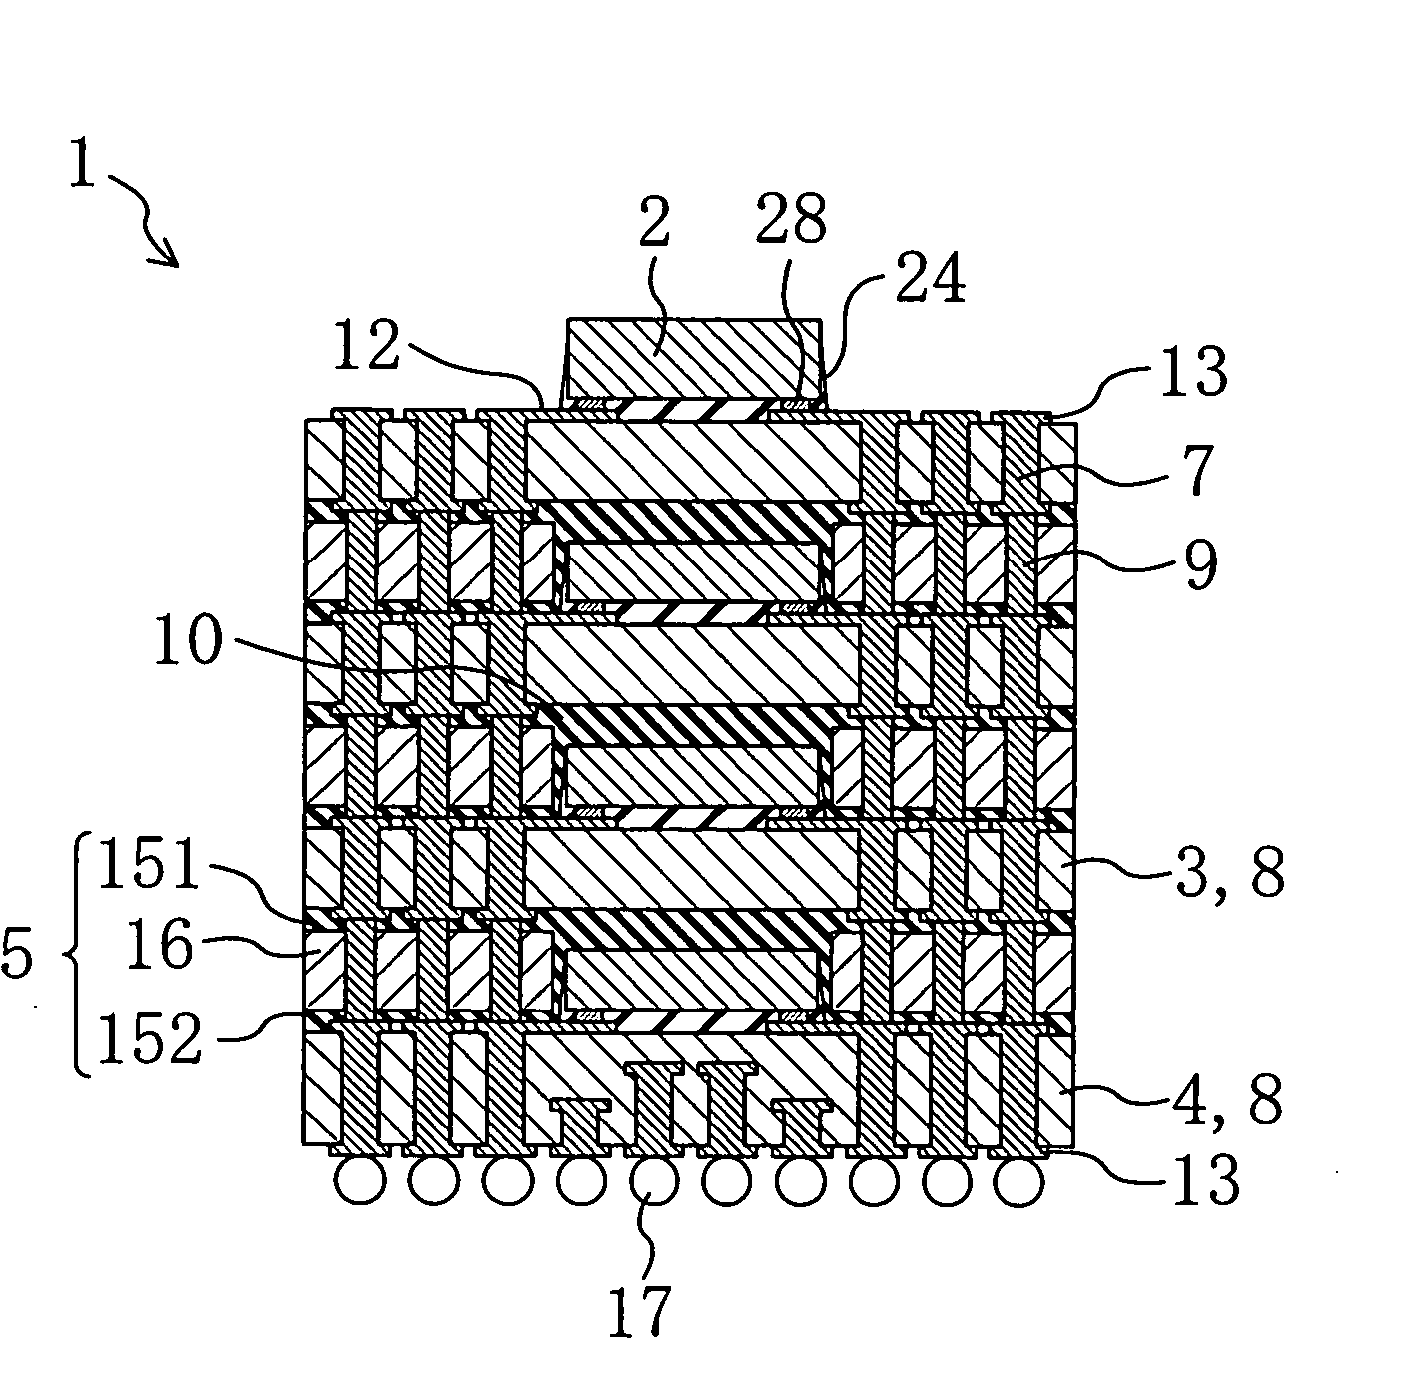 Multilevel semiconductor module and method for fabricating the same